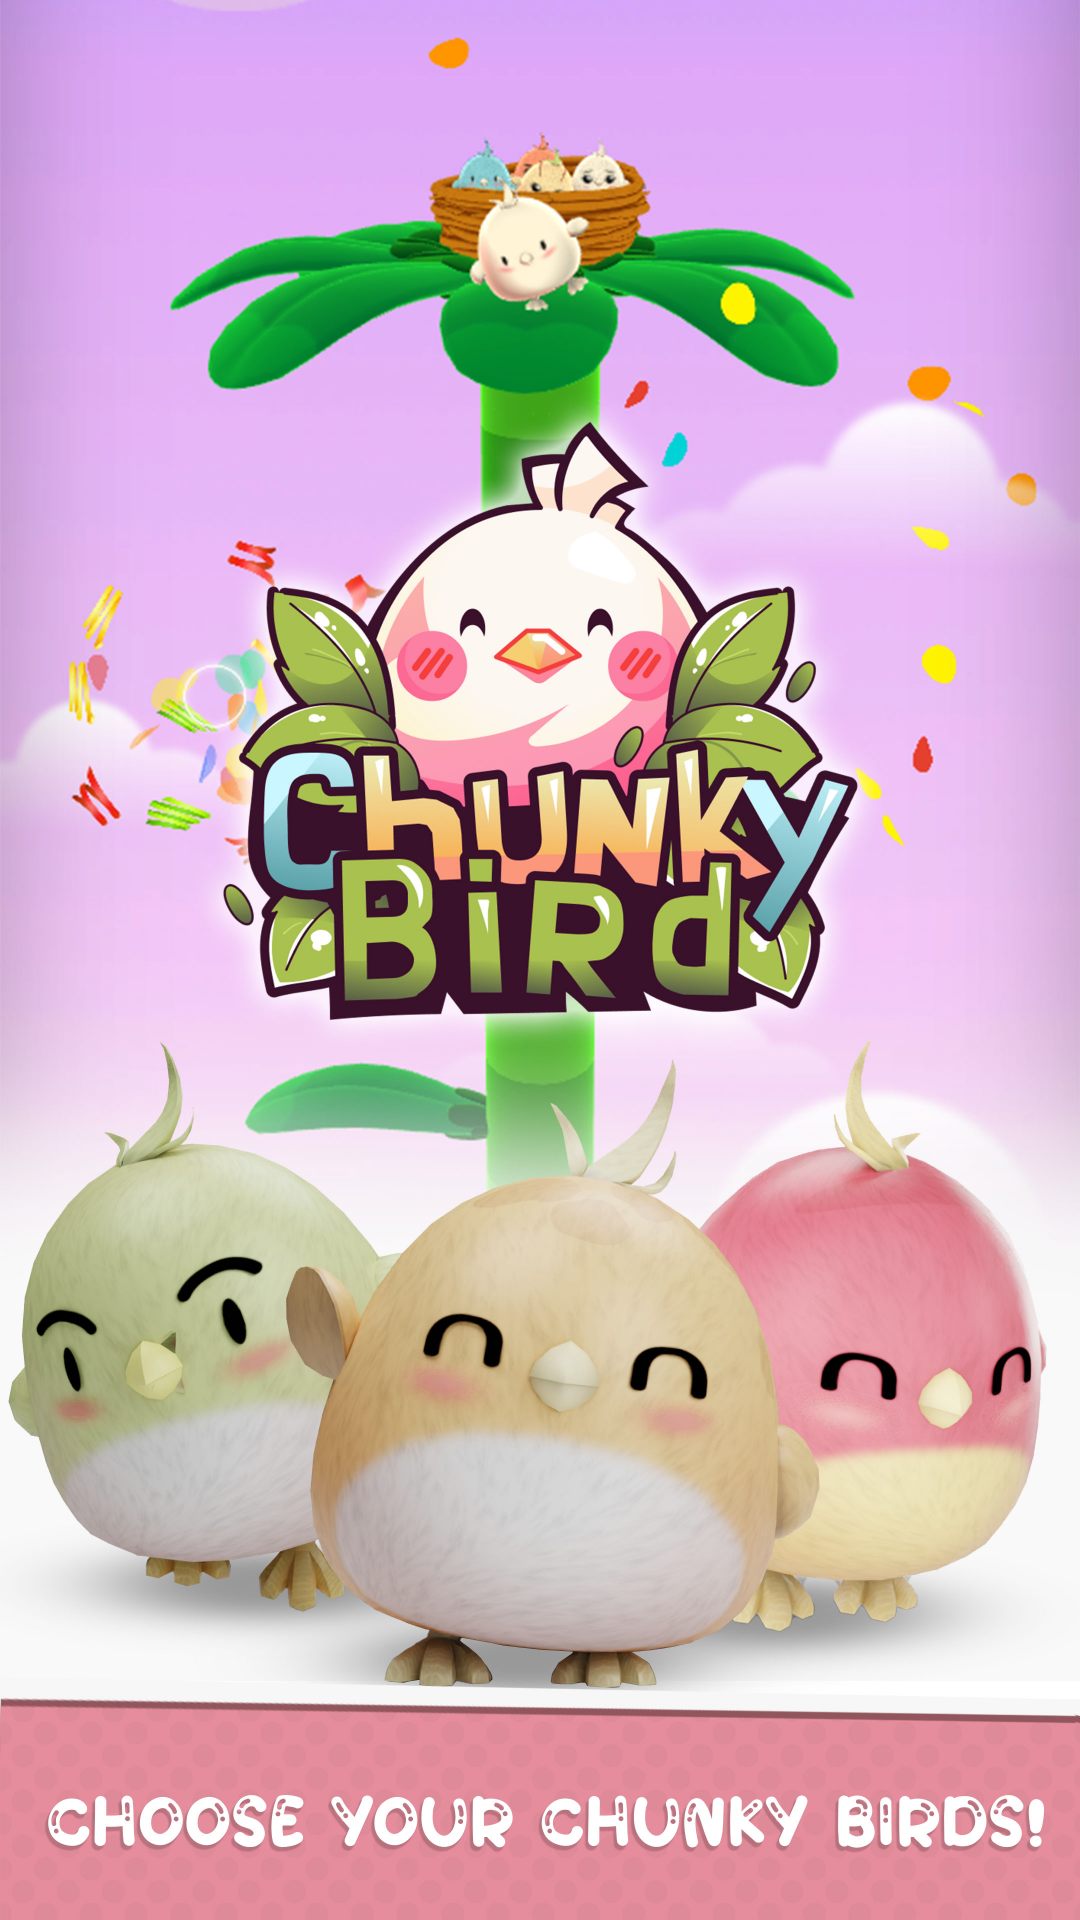 A screenshot of the ChunkyBird collection, displaying a variety of adorable bird characters with unique colors and personalities.